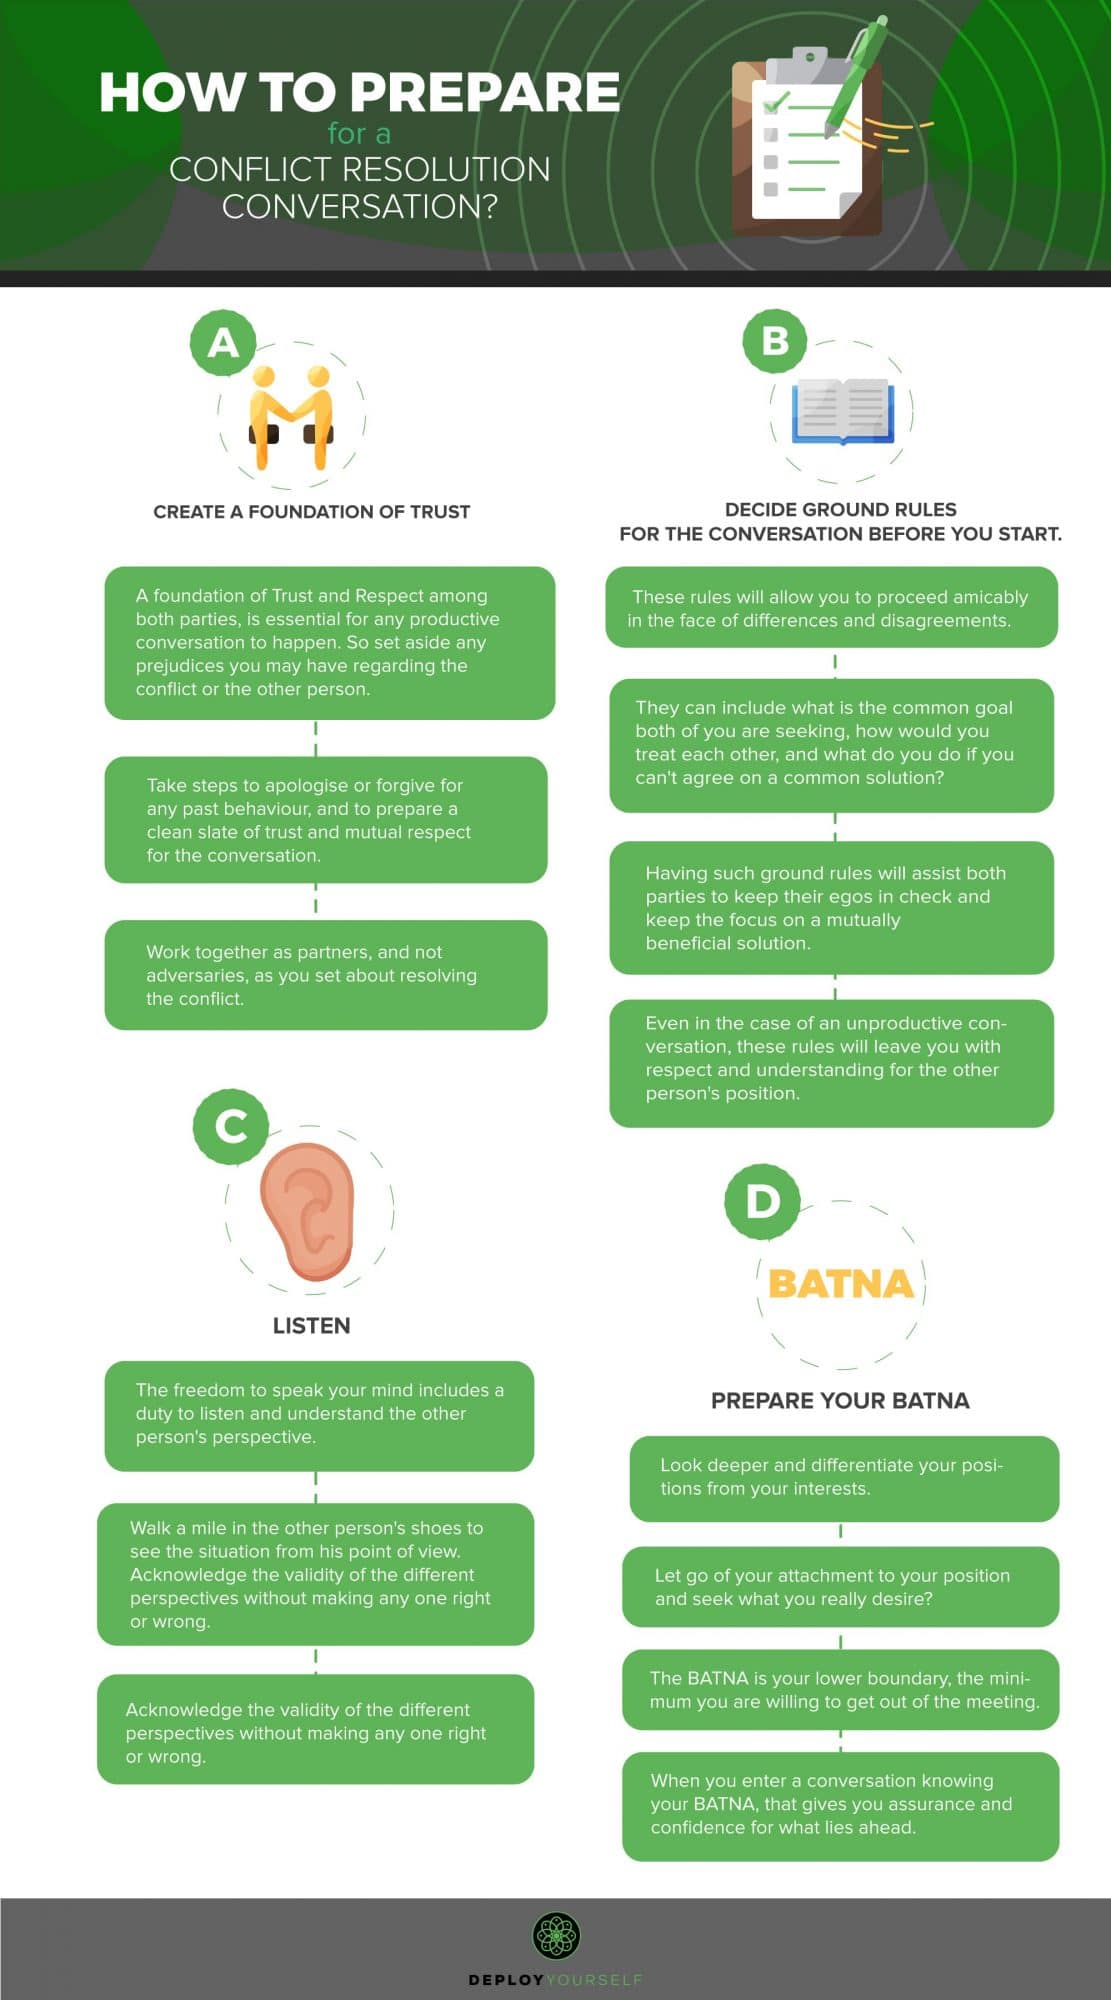 How To Prepare For A Conflict Resolution Conversation? Infographic